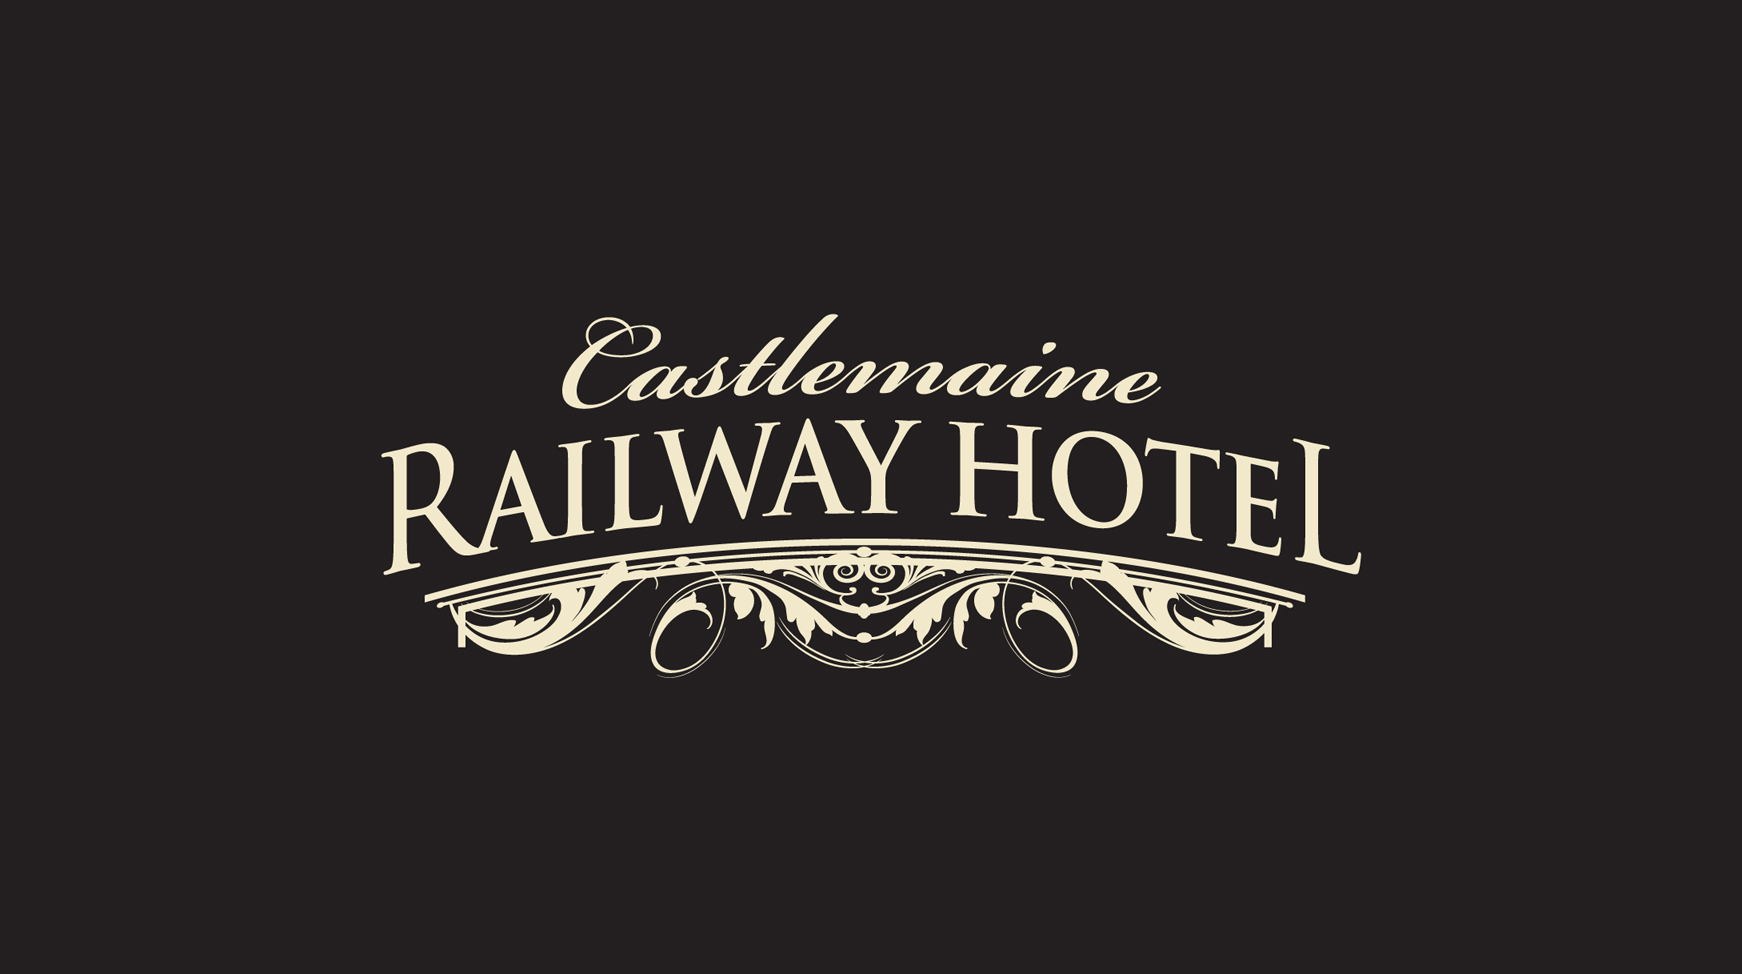 Railway Hotel Castlemaine - Tourism Canberra